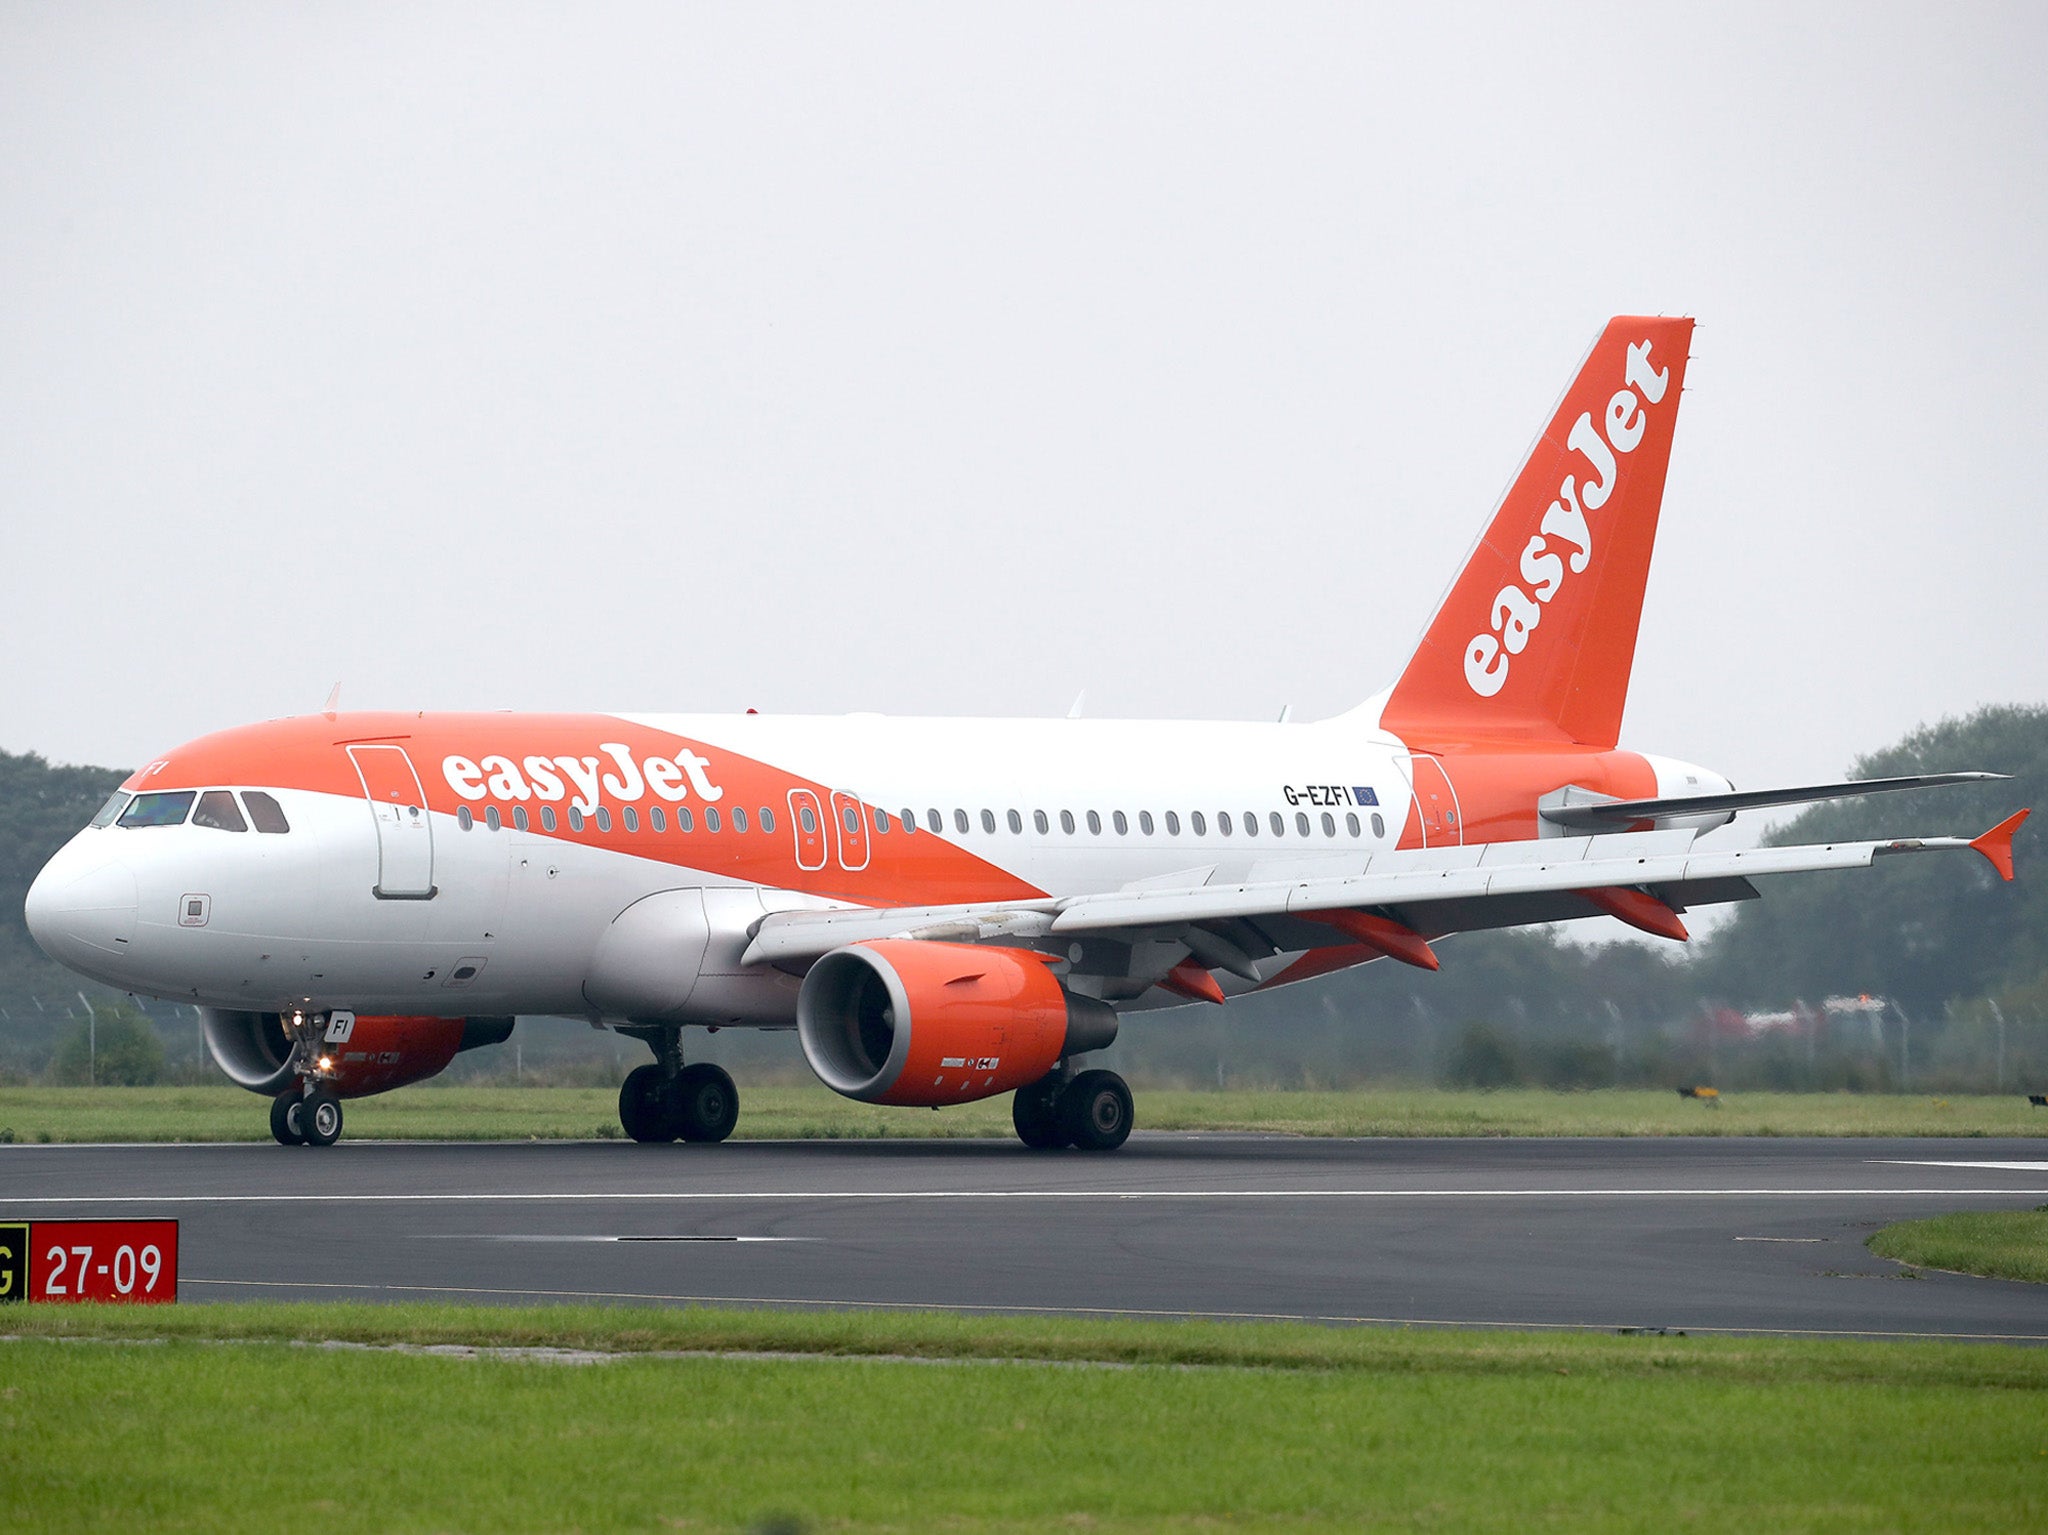 easyJet's profits have been affected by a tumultuous financial year